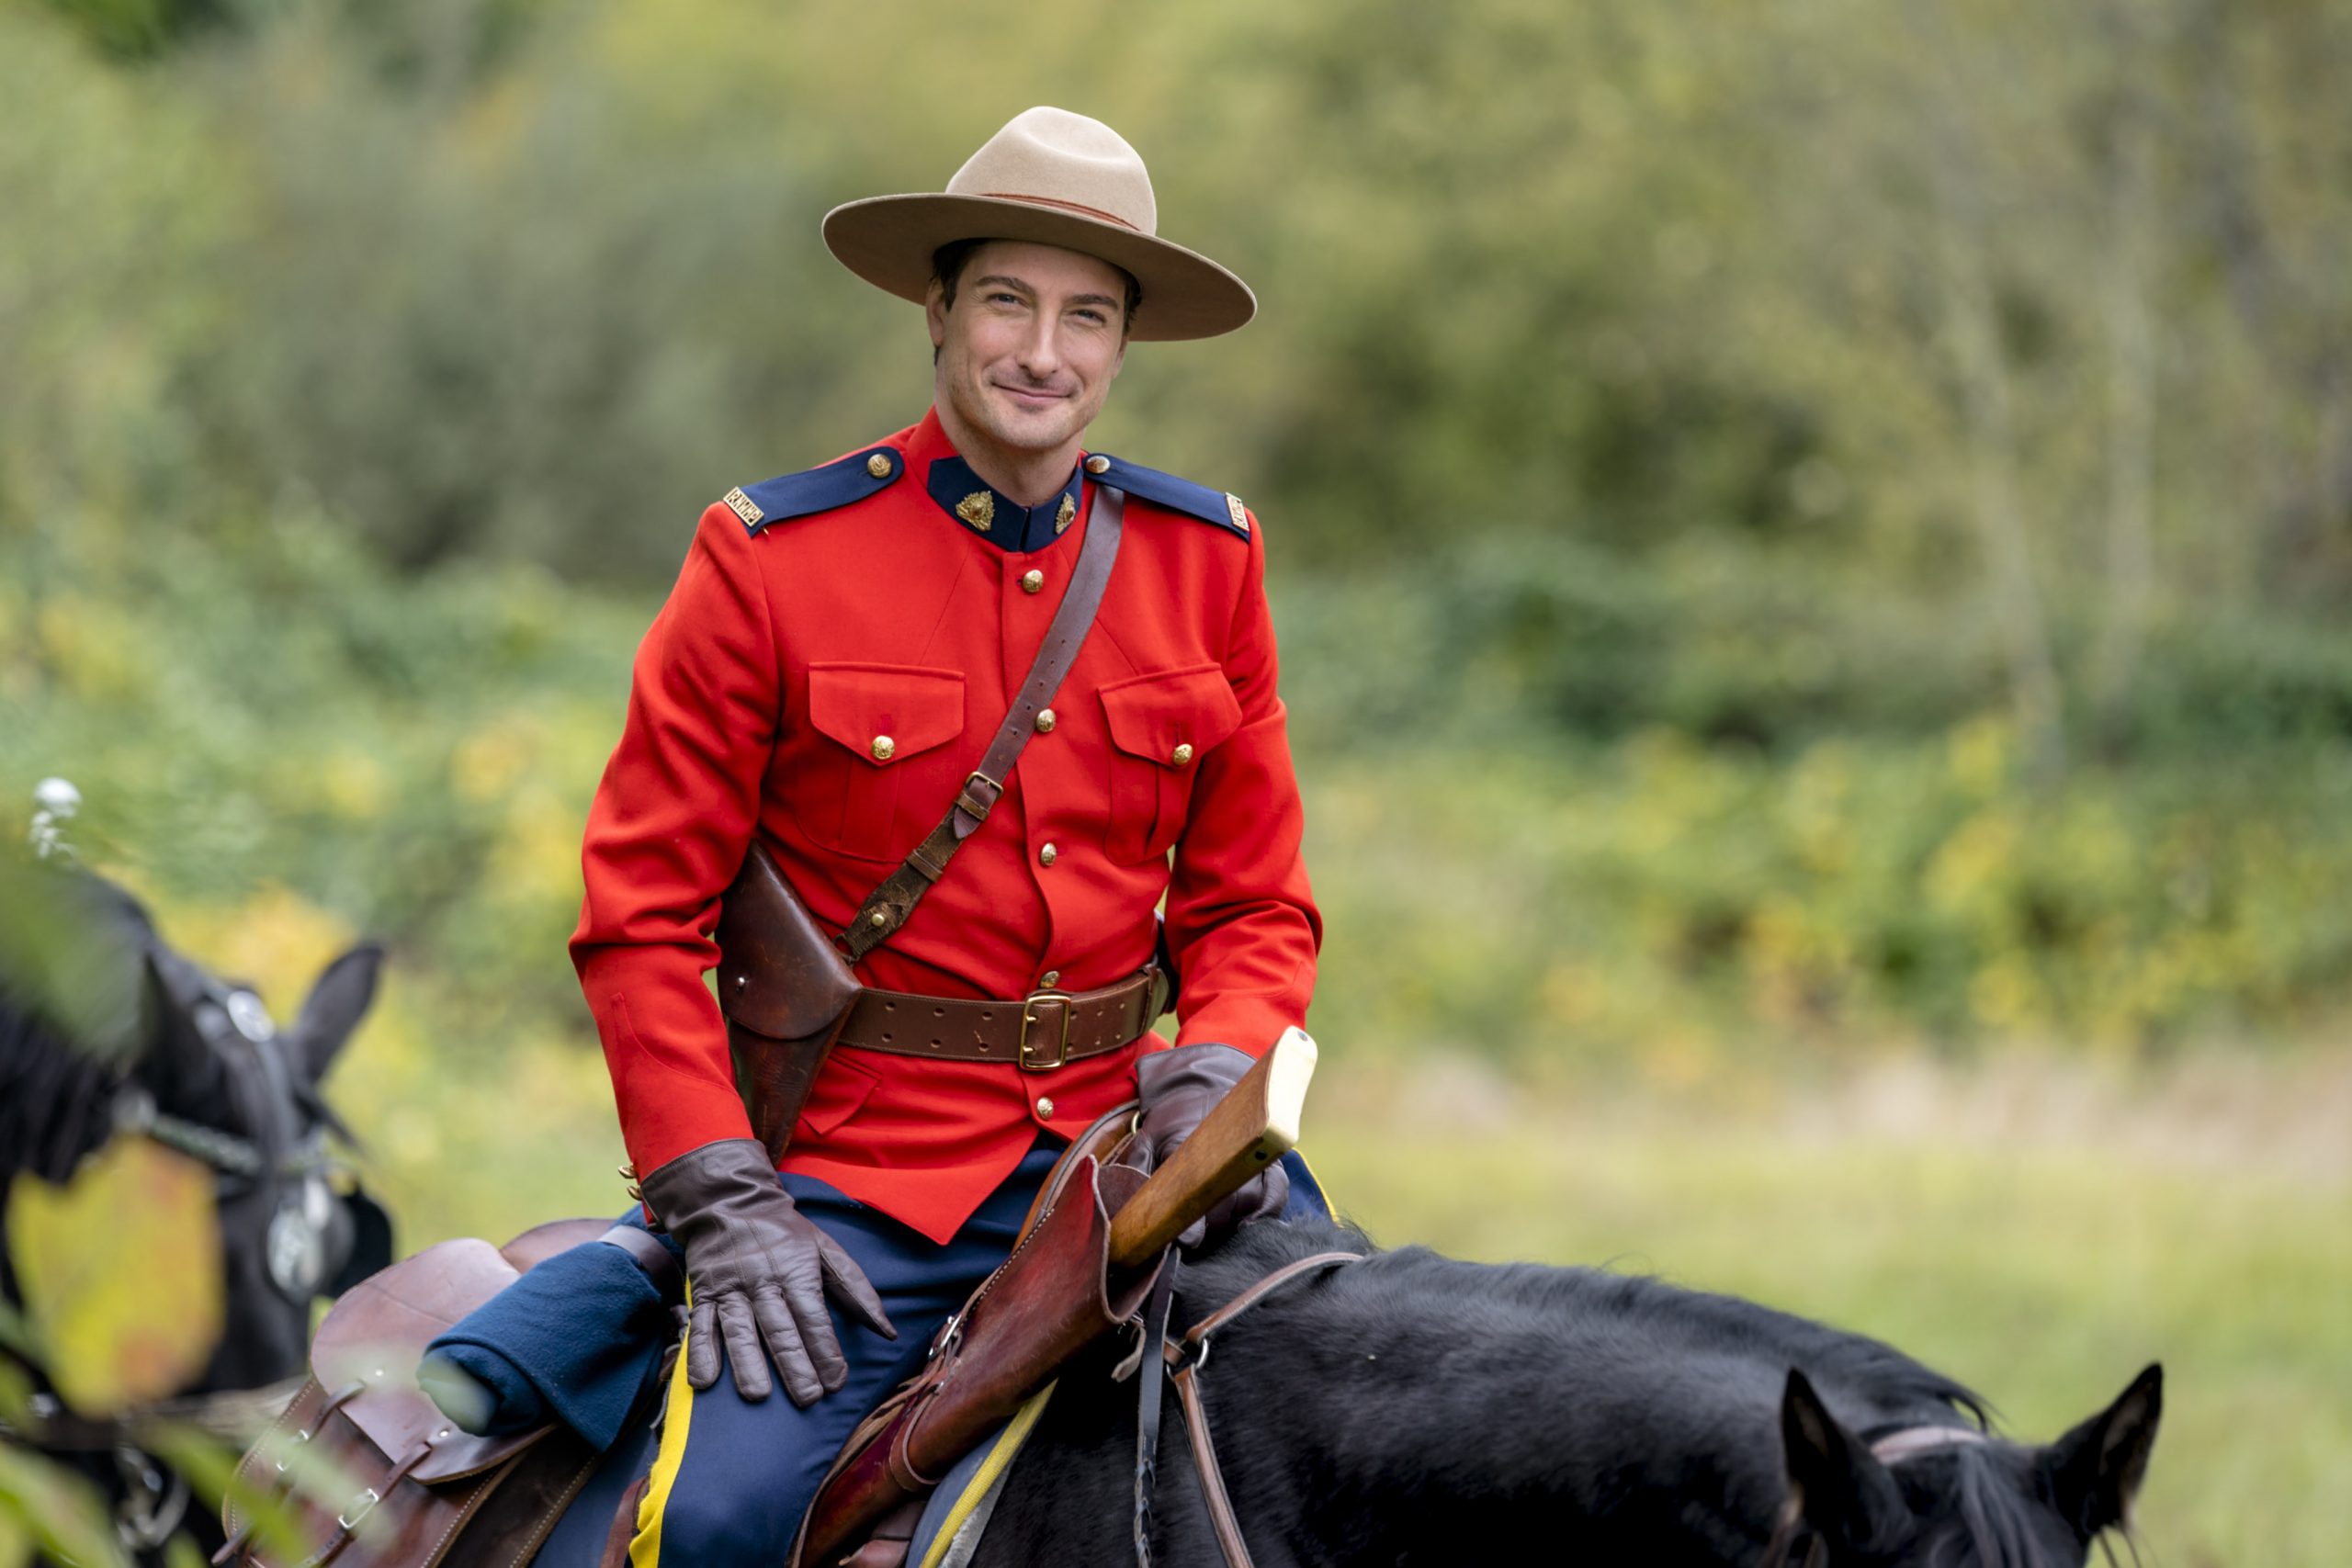 Daniel Lissing, as Jack, riding a horse in When Calls the Heart